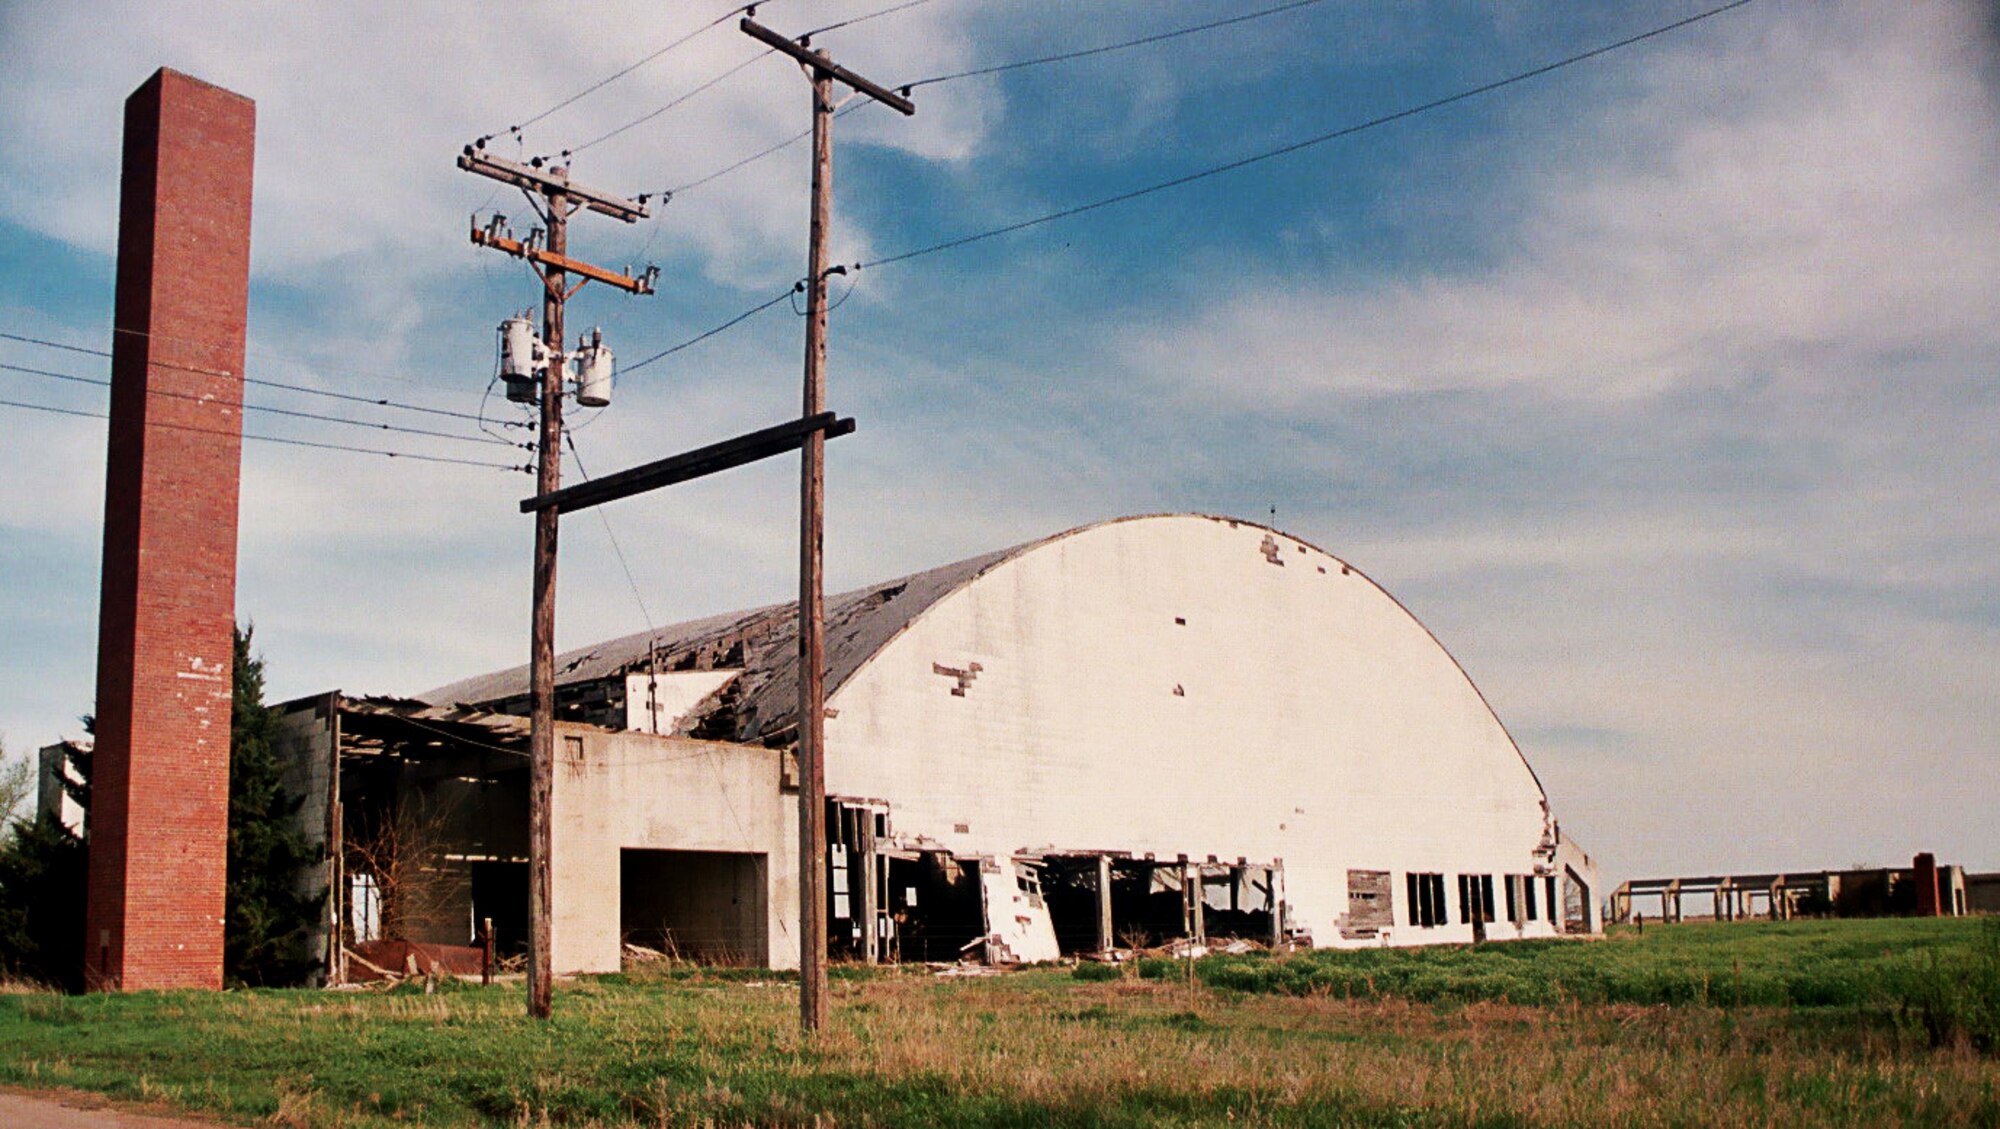 The remains of an aircraft hangar stand on the former location of Bruning Army Air Field, Neb., in this photo taken on July 17, 2004.  The 507th Fighter Group, the precursor to the modern-day 507th Air Refueling Wing, was activated at Bruning AAF in 1944.  (U.S. Air Force photo by Lt. Col. [ret.] Donald Klinko)